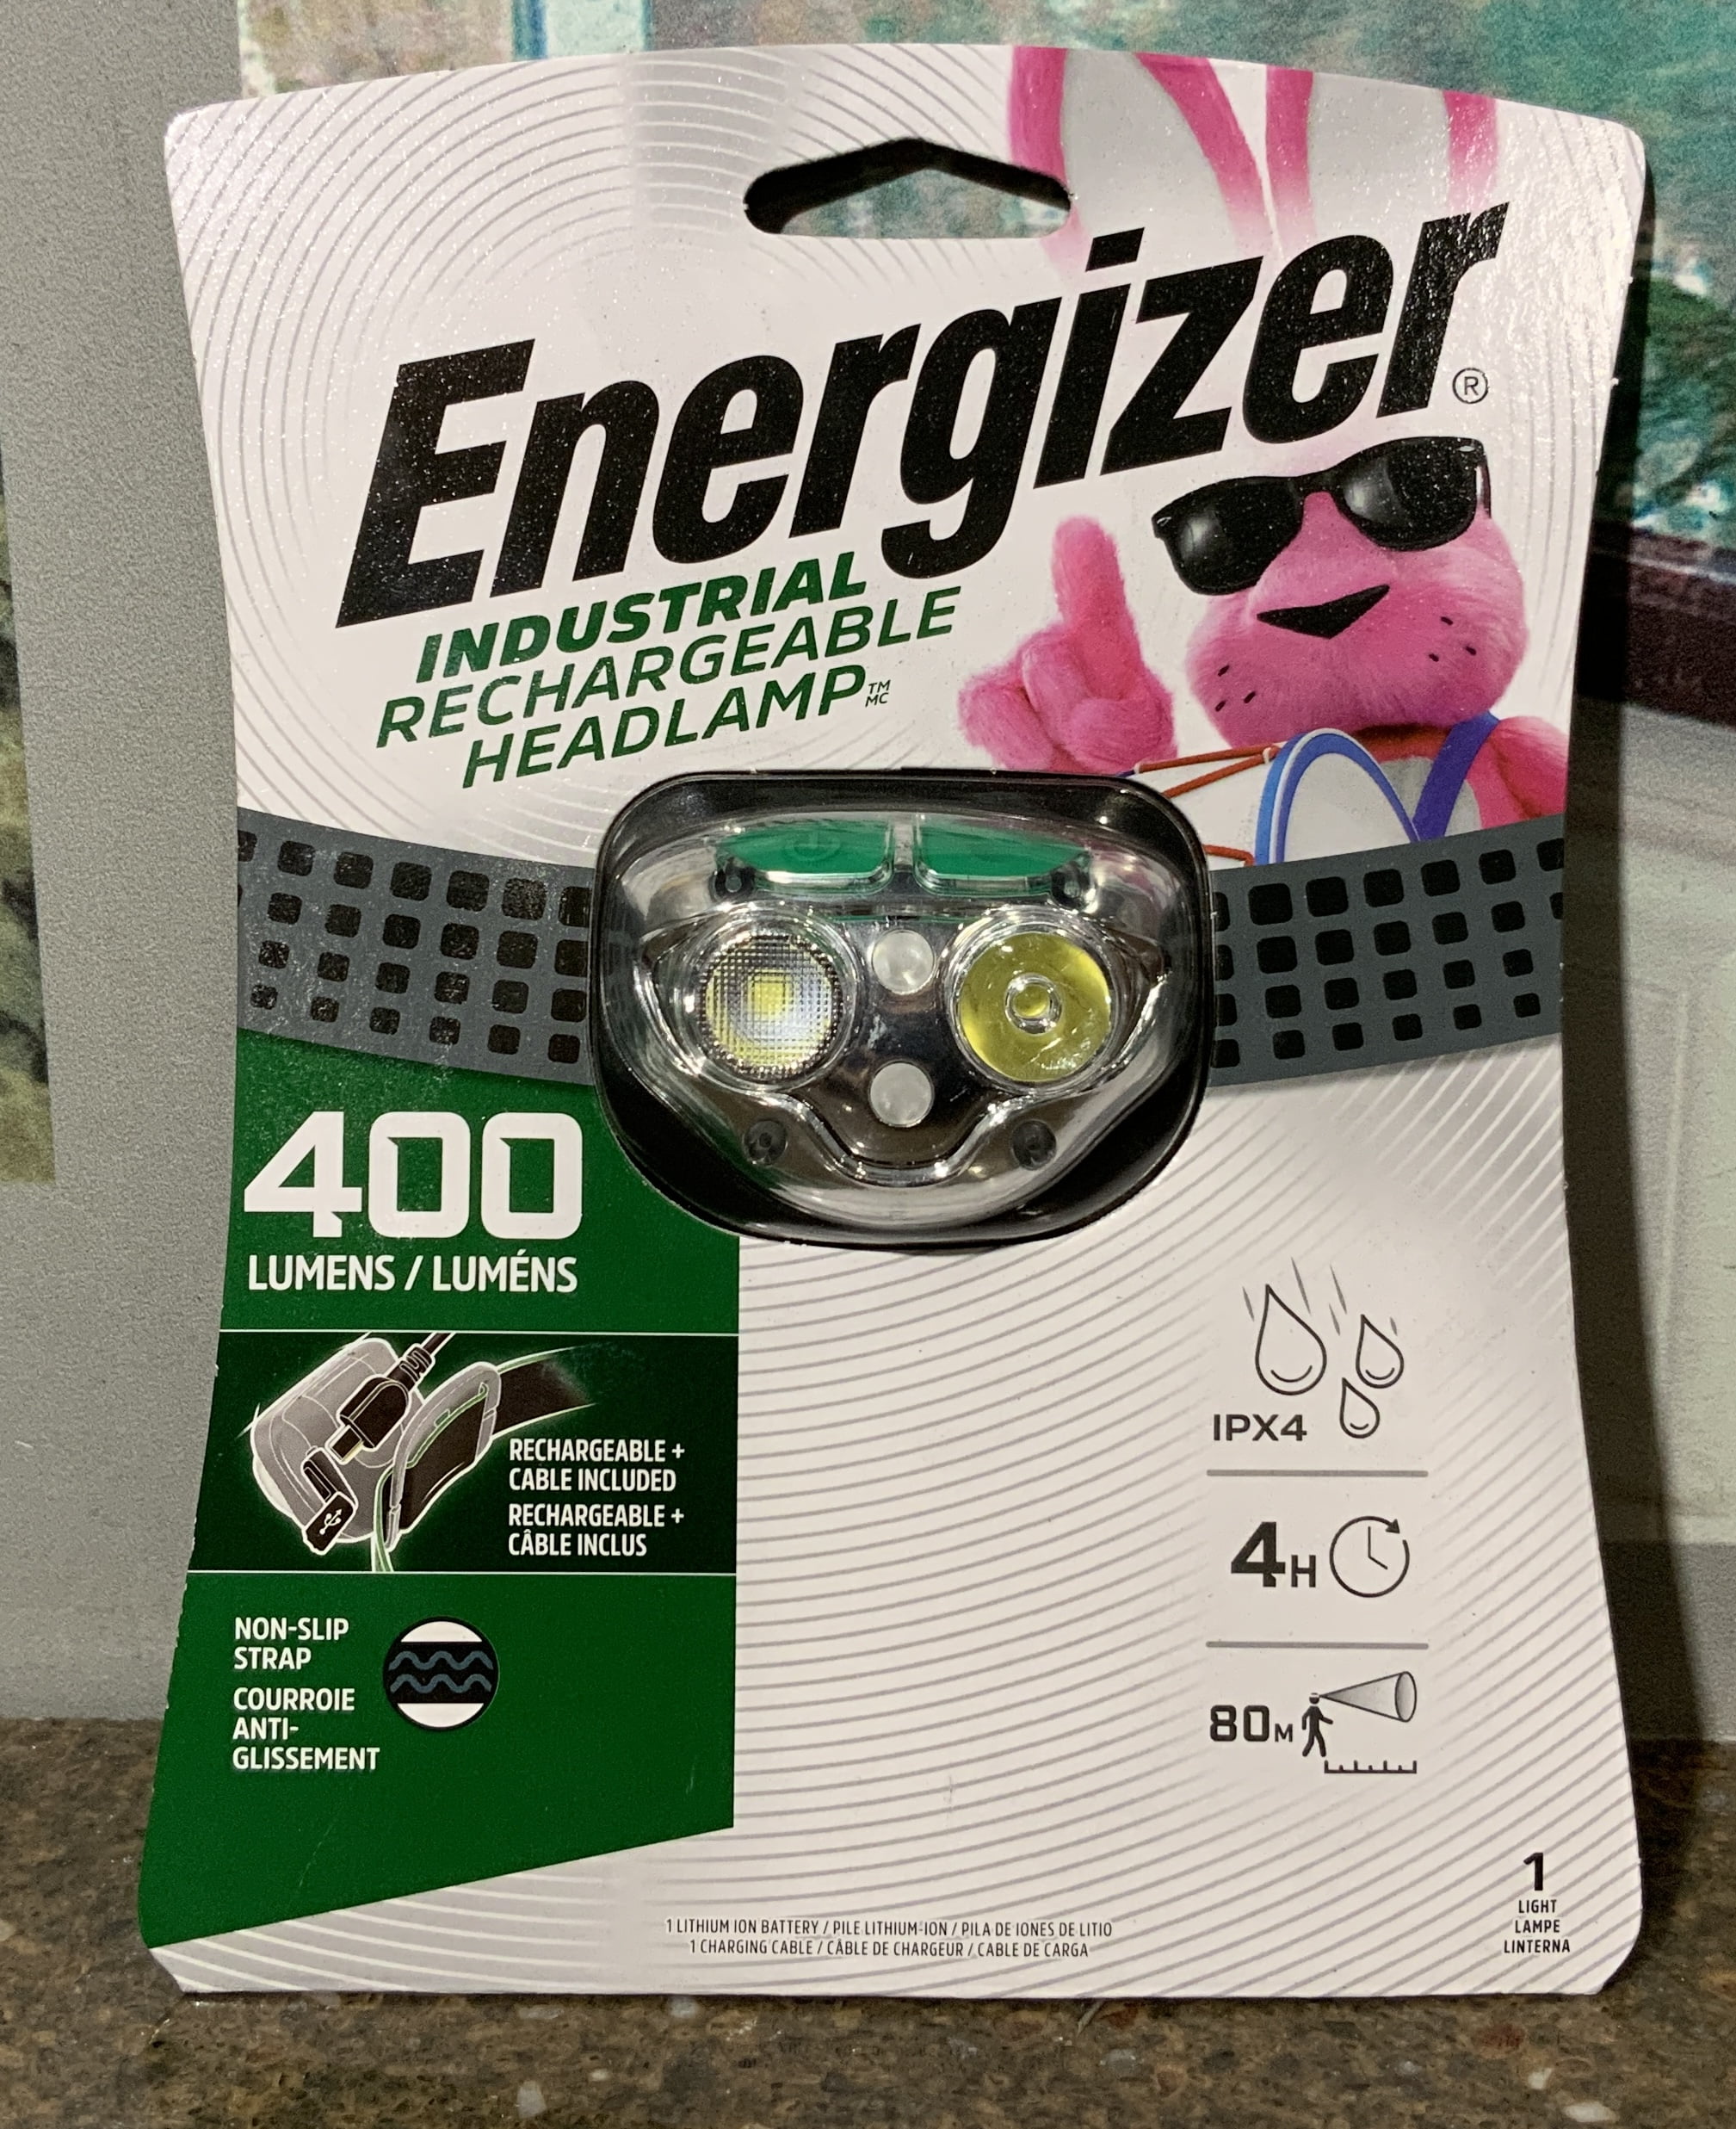 Headlamp Energizer Lumens IPX4 Visibility 4 Rechargeable Industrial 80m Hour 400